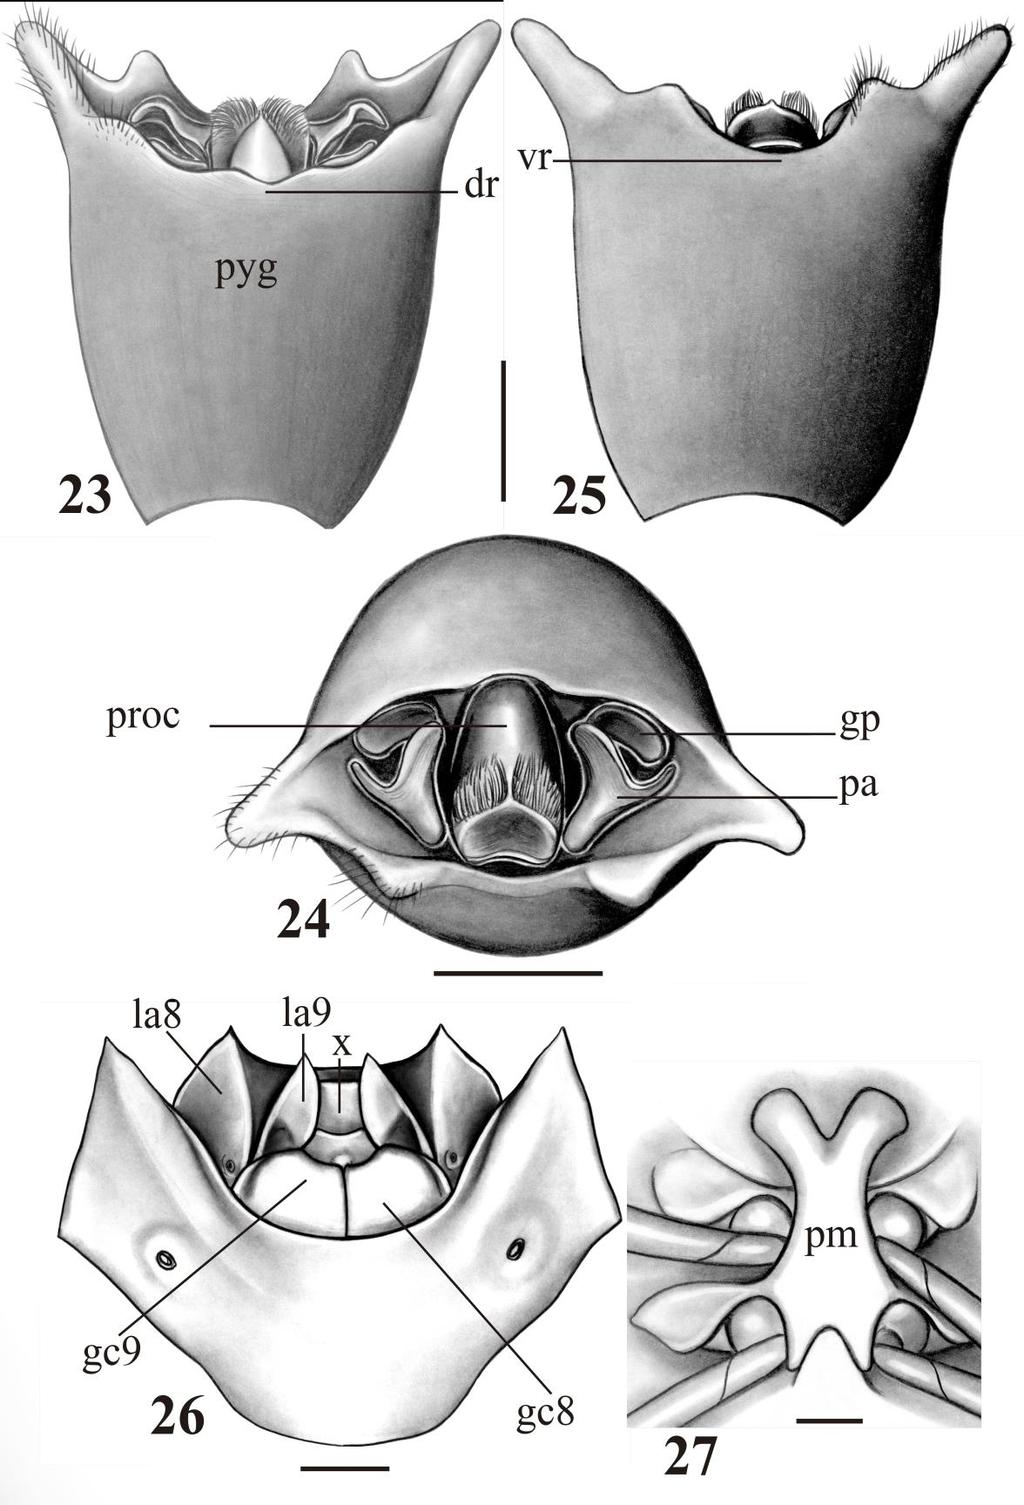 25 FIGURES 23 27. Plagaedessa celsa. 23 25 Male, pygophore; 23 dorsal view; 24 posterior view; 25 ventral view. 26 Female, genital plates. 27 Metasternal process, ventral view.